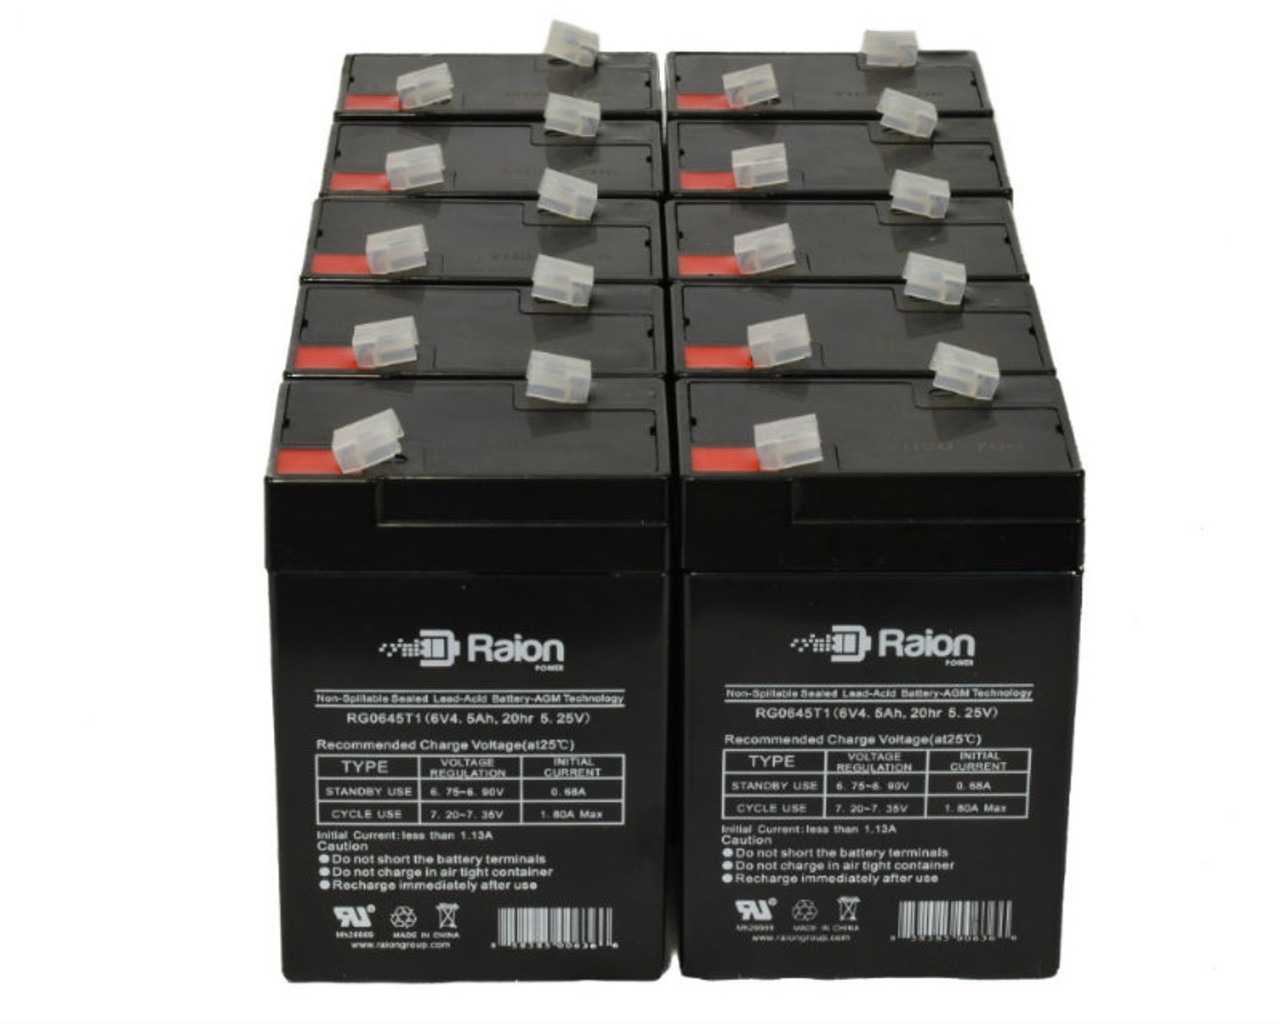 Raion Power 6 Volt 4.5Ah RG0645T1 Replacement Battery for Newmox FNC-640 - 10 Pack